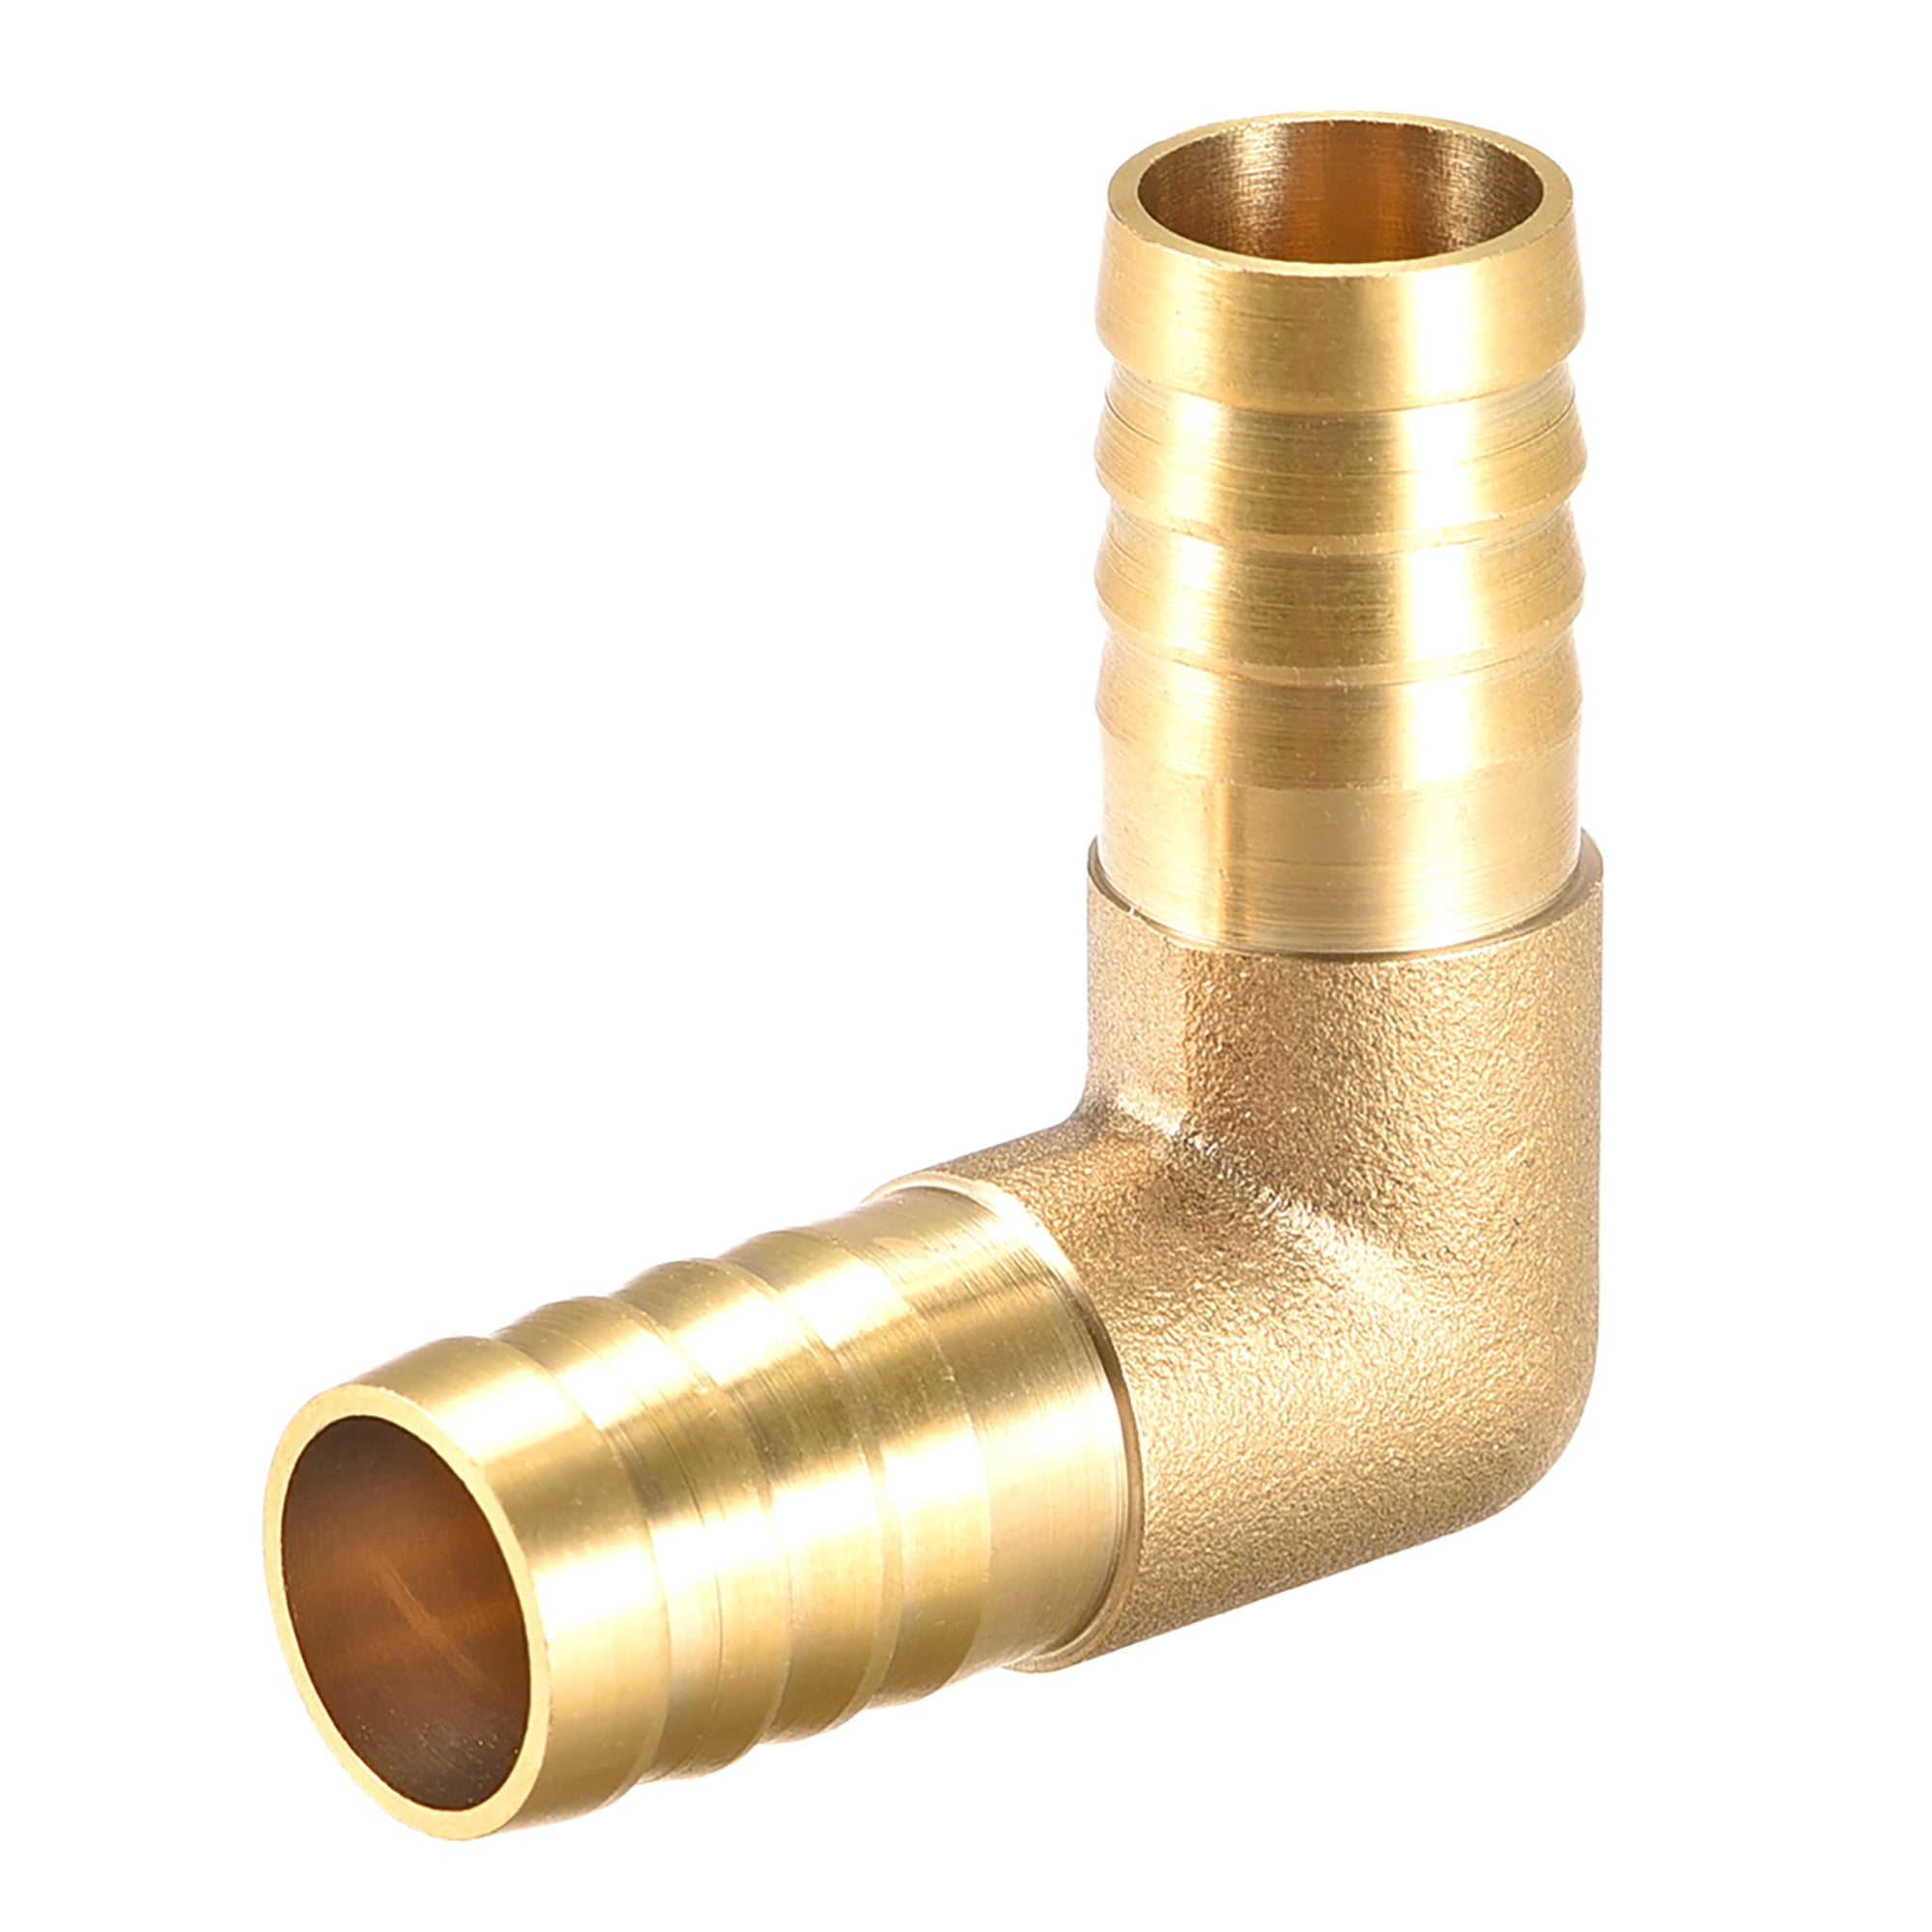 42mm Compression 90° ElbowBrass Plumbing Fitting